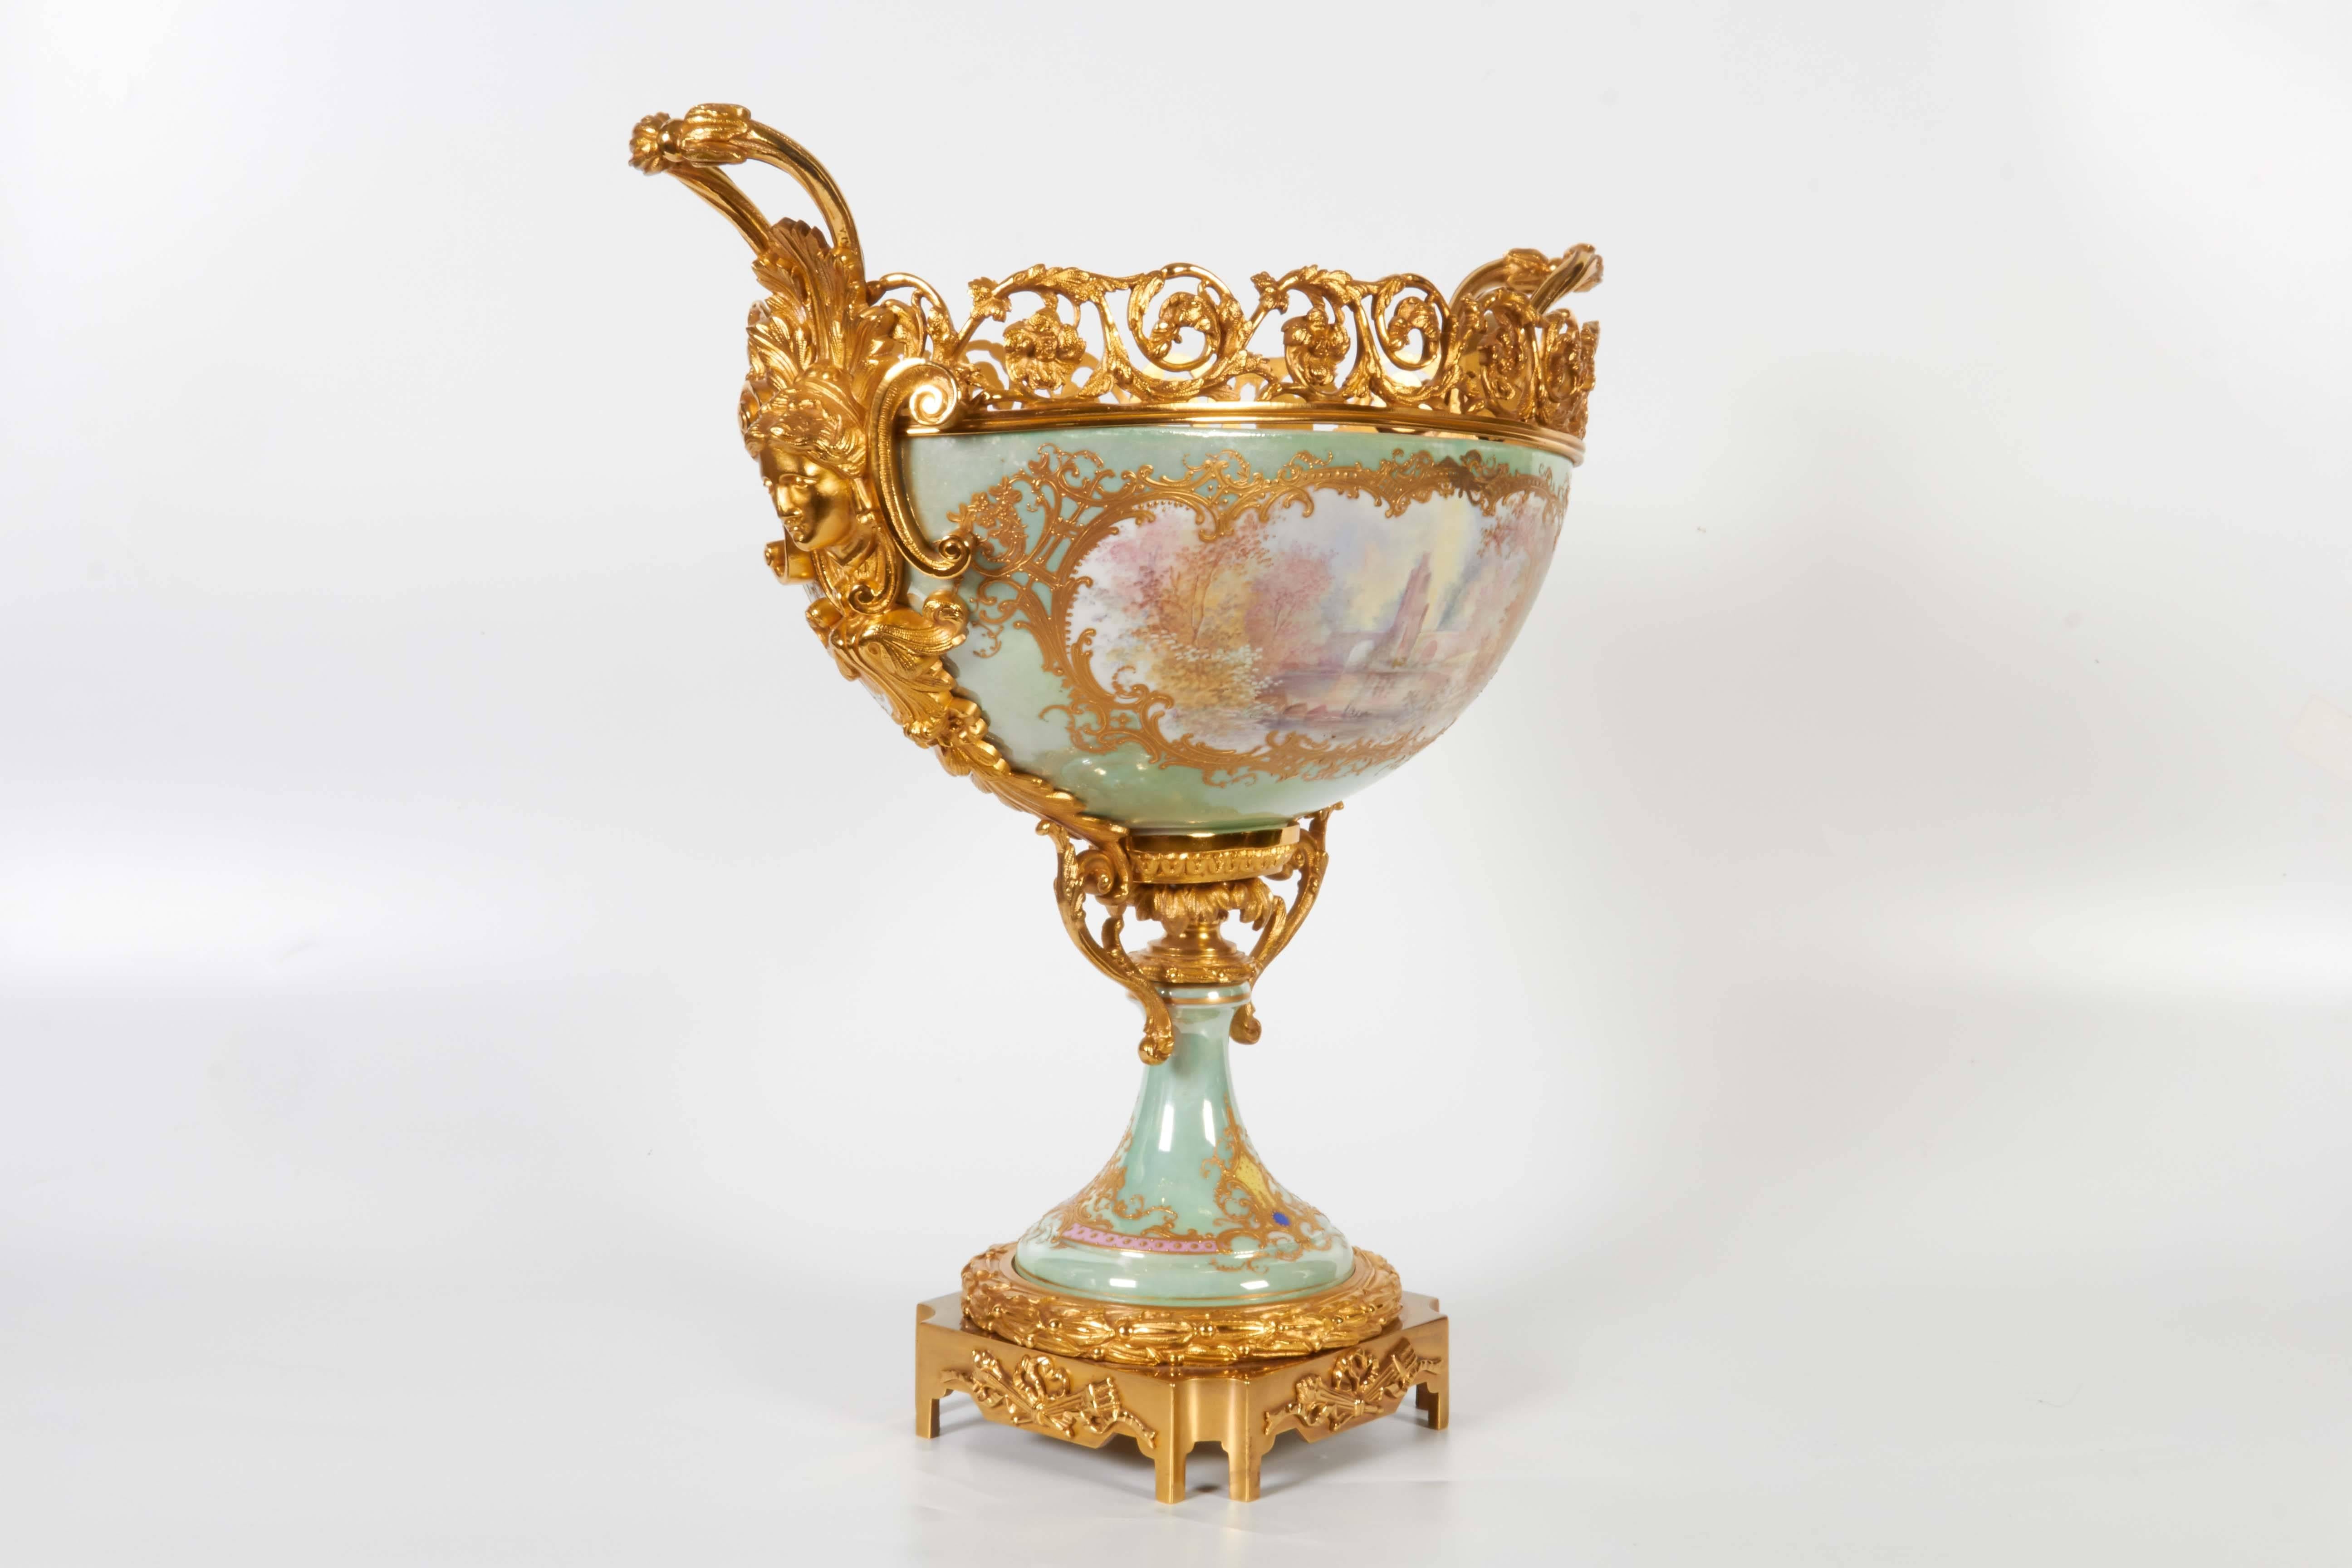 Bronze French Sèvres Porcelain & Ormolu-Mounted Hand-Painted Oval Centerpiece/Jardenier For Sale